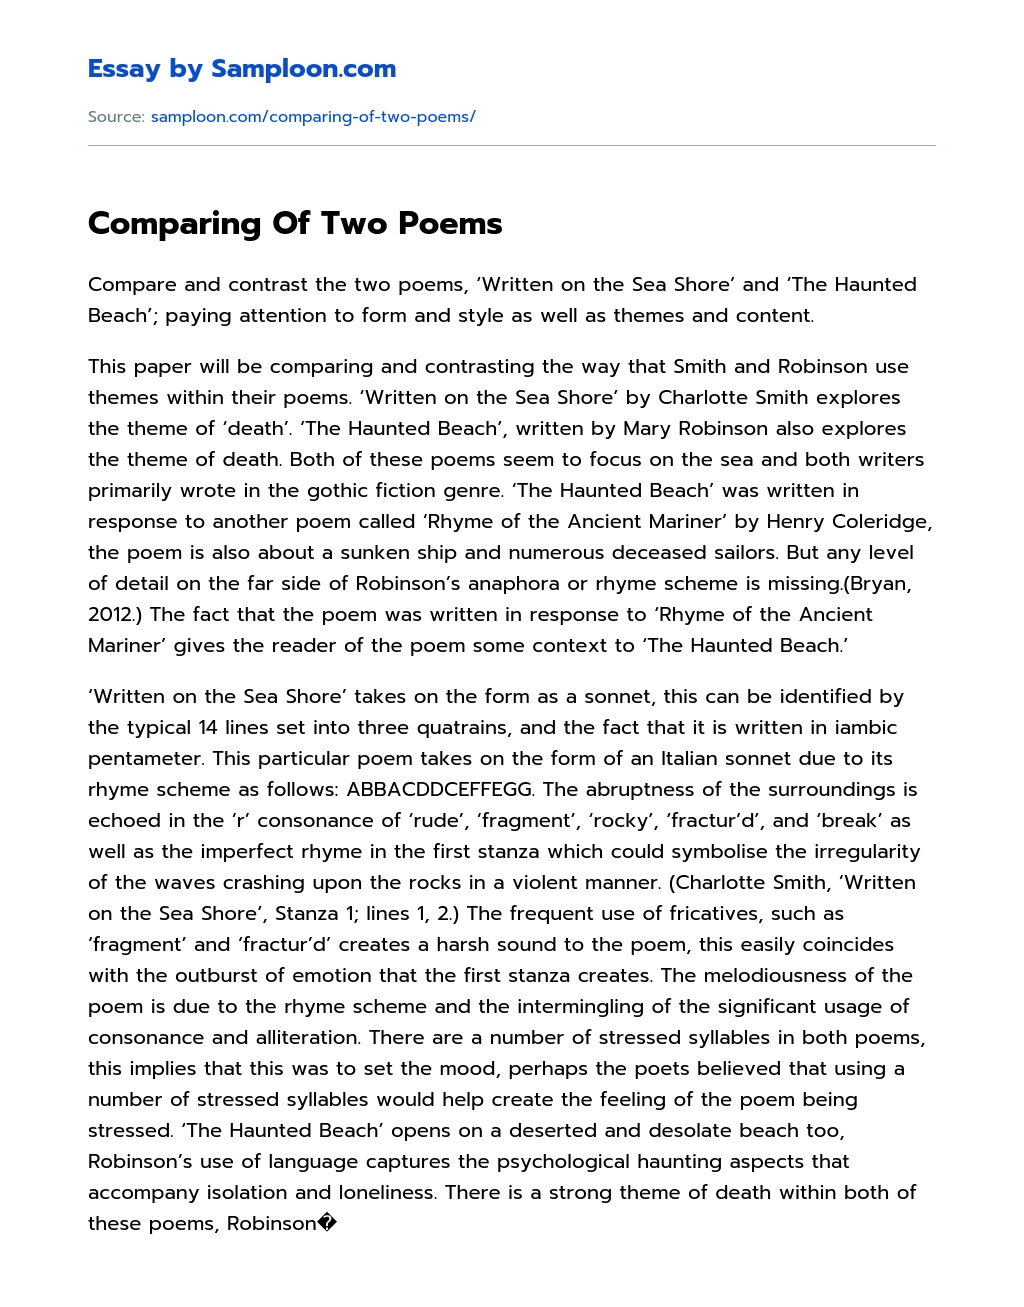 Comparing Of  Two Poems essay